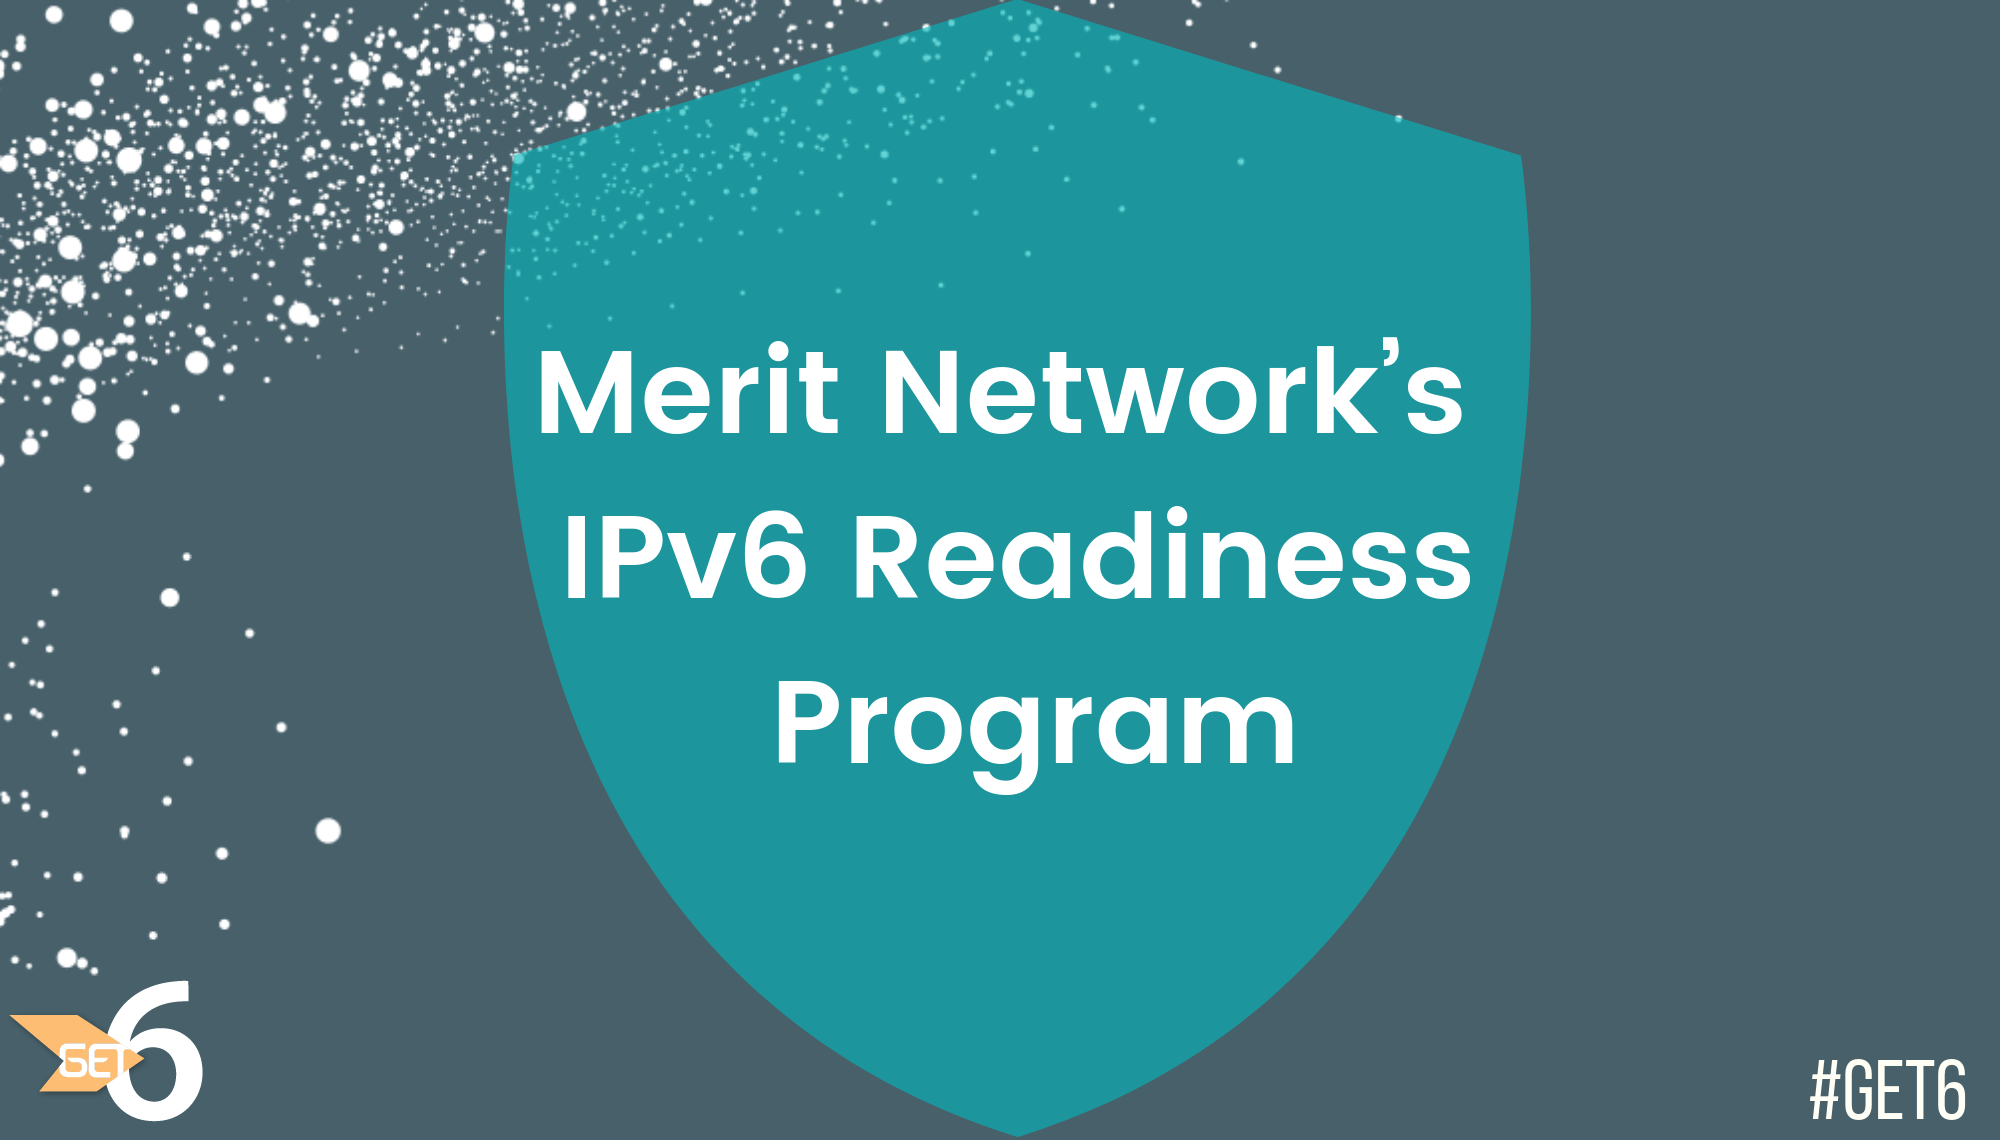 A Model for Advancing IPv6 Deployment in REN and Higher Ed Networks